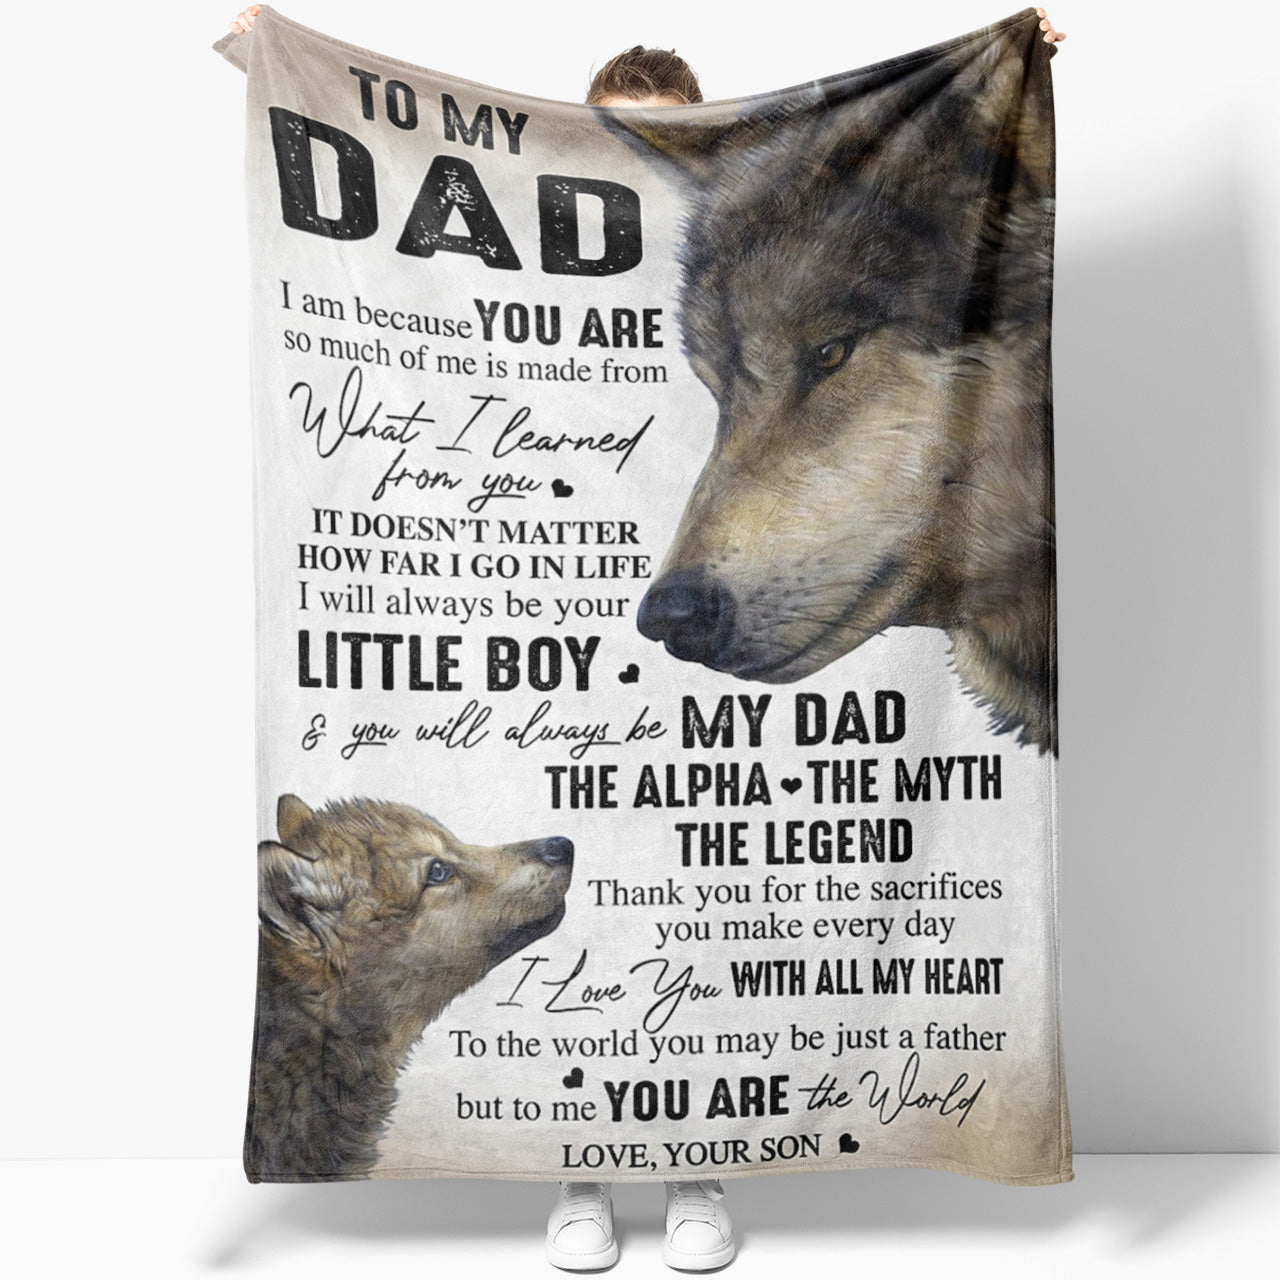 Dad Gifts Dad Christmas Gift Dad Birthday Gift Gift For Dad Dad Gift Idea  From | eBay